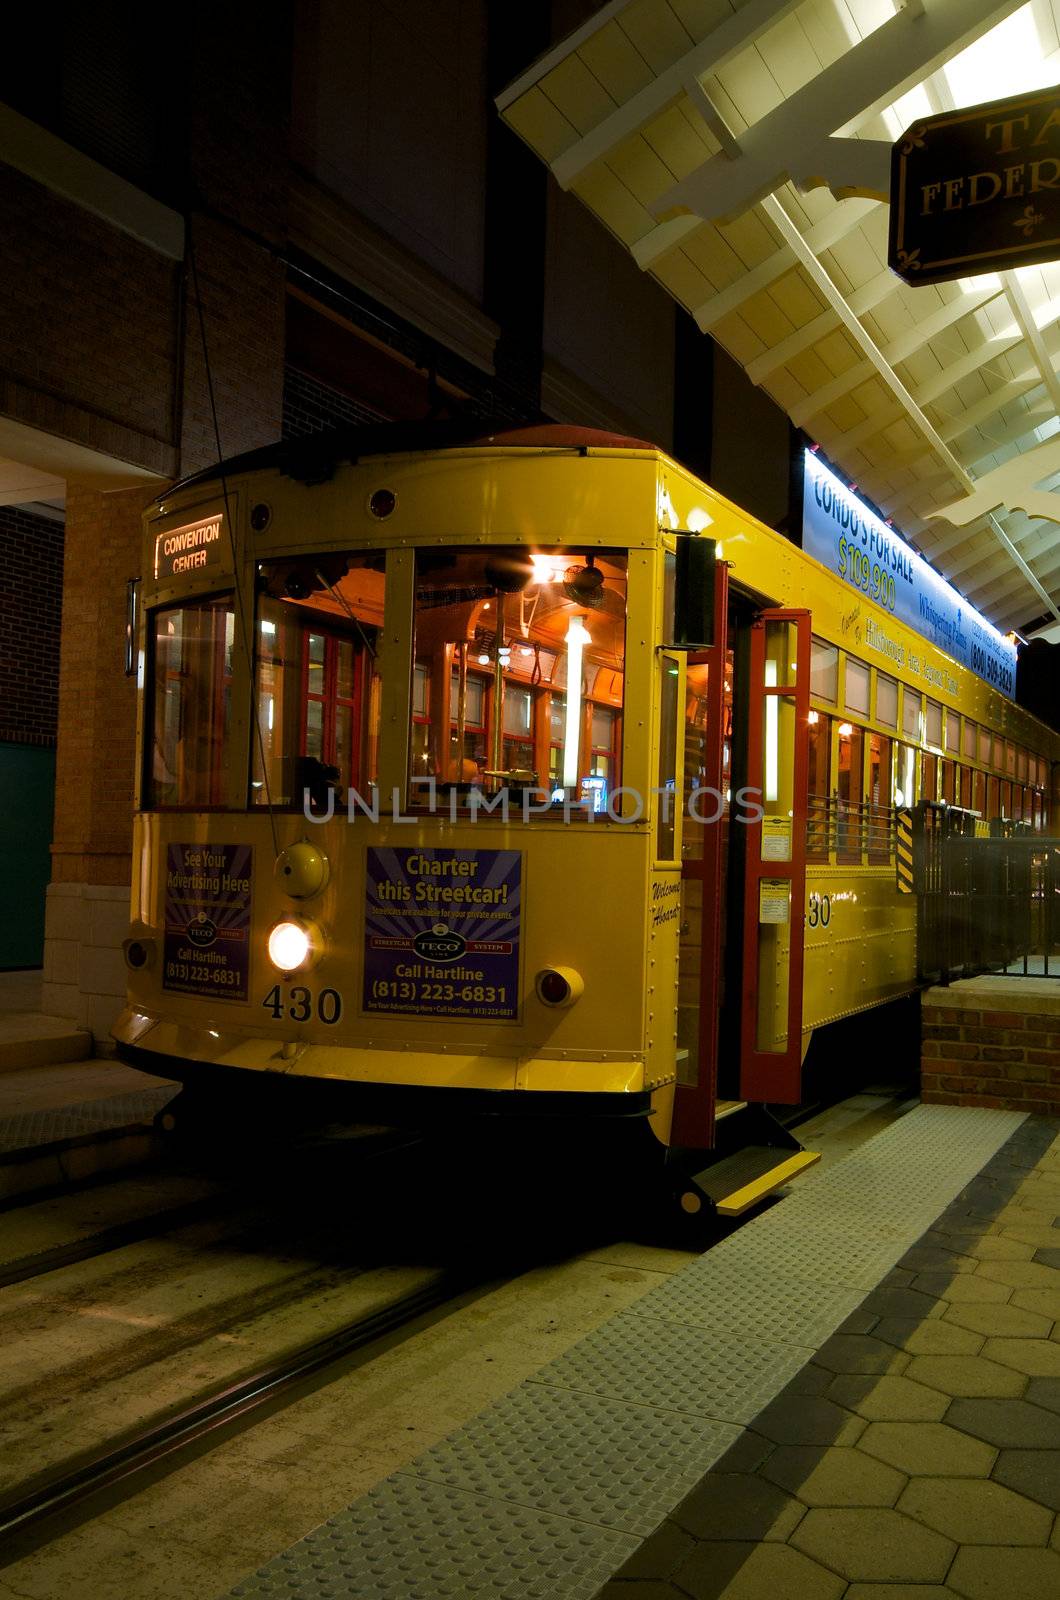 Trolley waiting in a sation in Ybor City, Tampa, Florida, UISA.